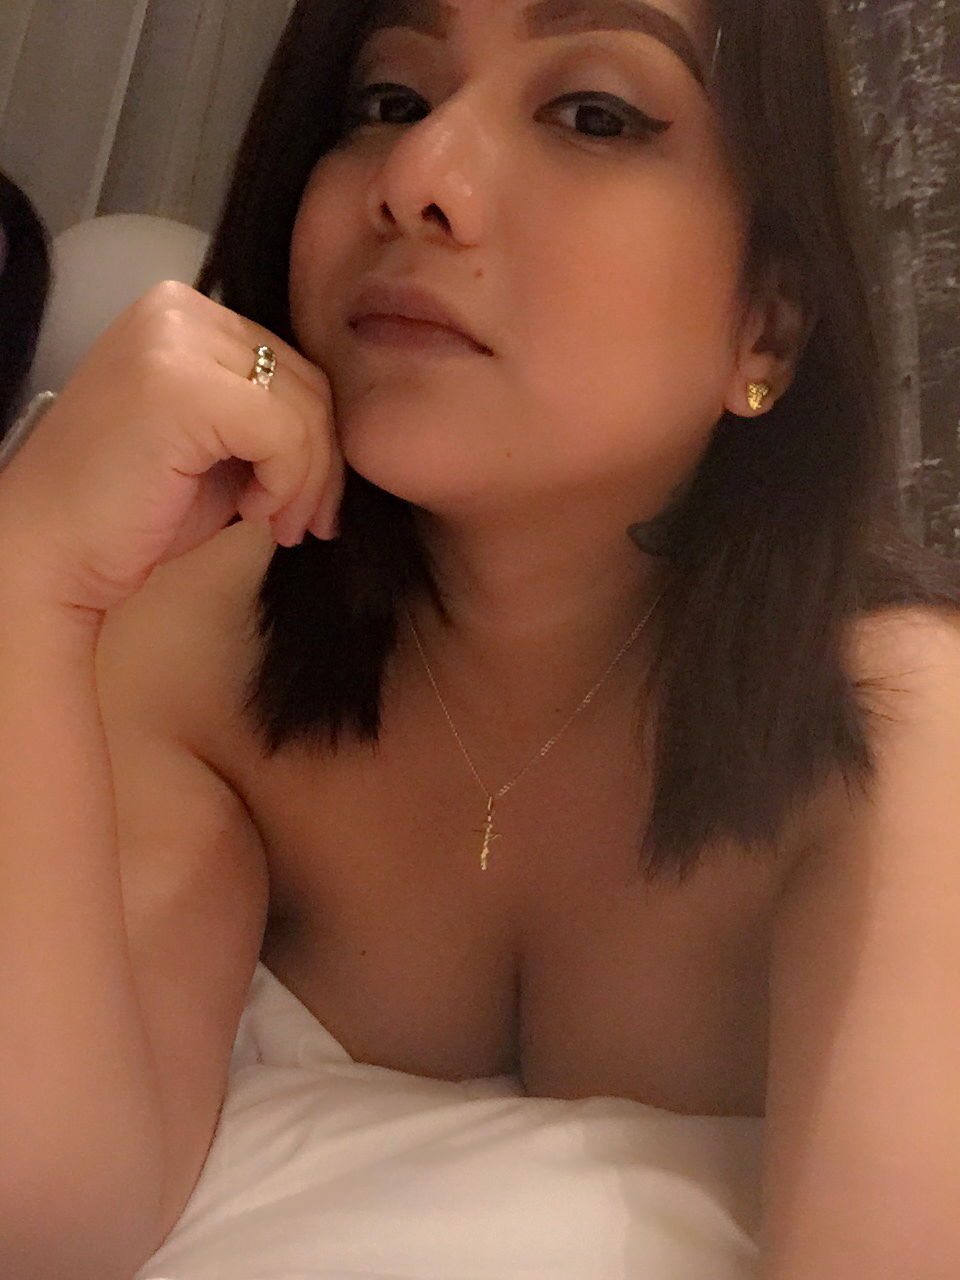 Play with escort girl singapore